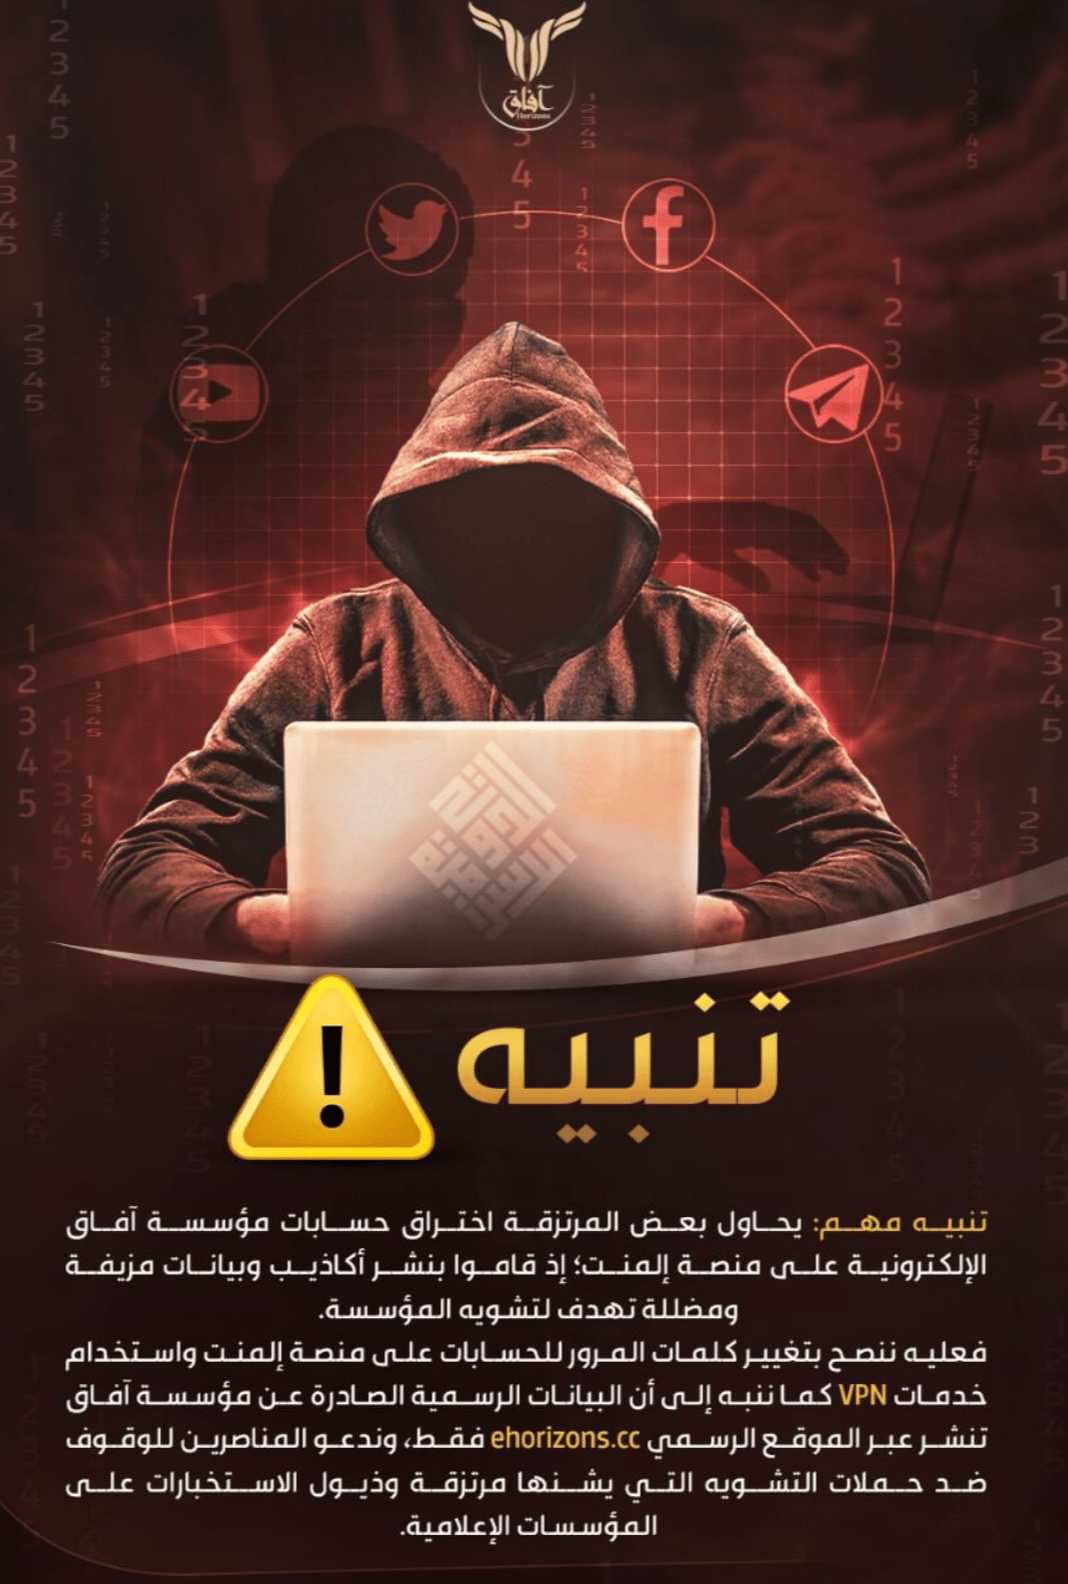 (Warning) Afaq Media aka Electronic Horizons Foundation (Unofficial Islamic State ) Warns Followers From Hacking Attempts and False News Against the Foundation - 22 March 2022